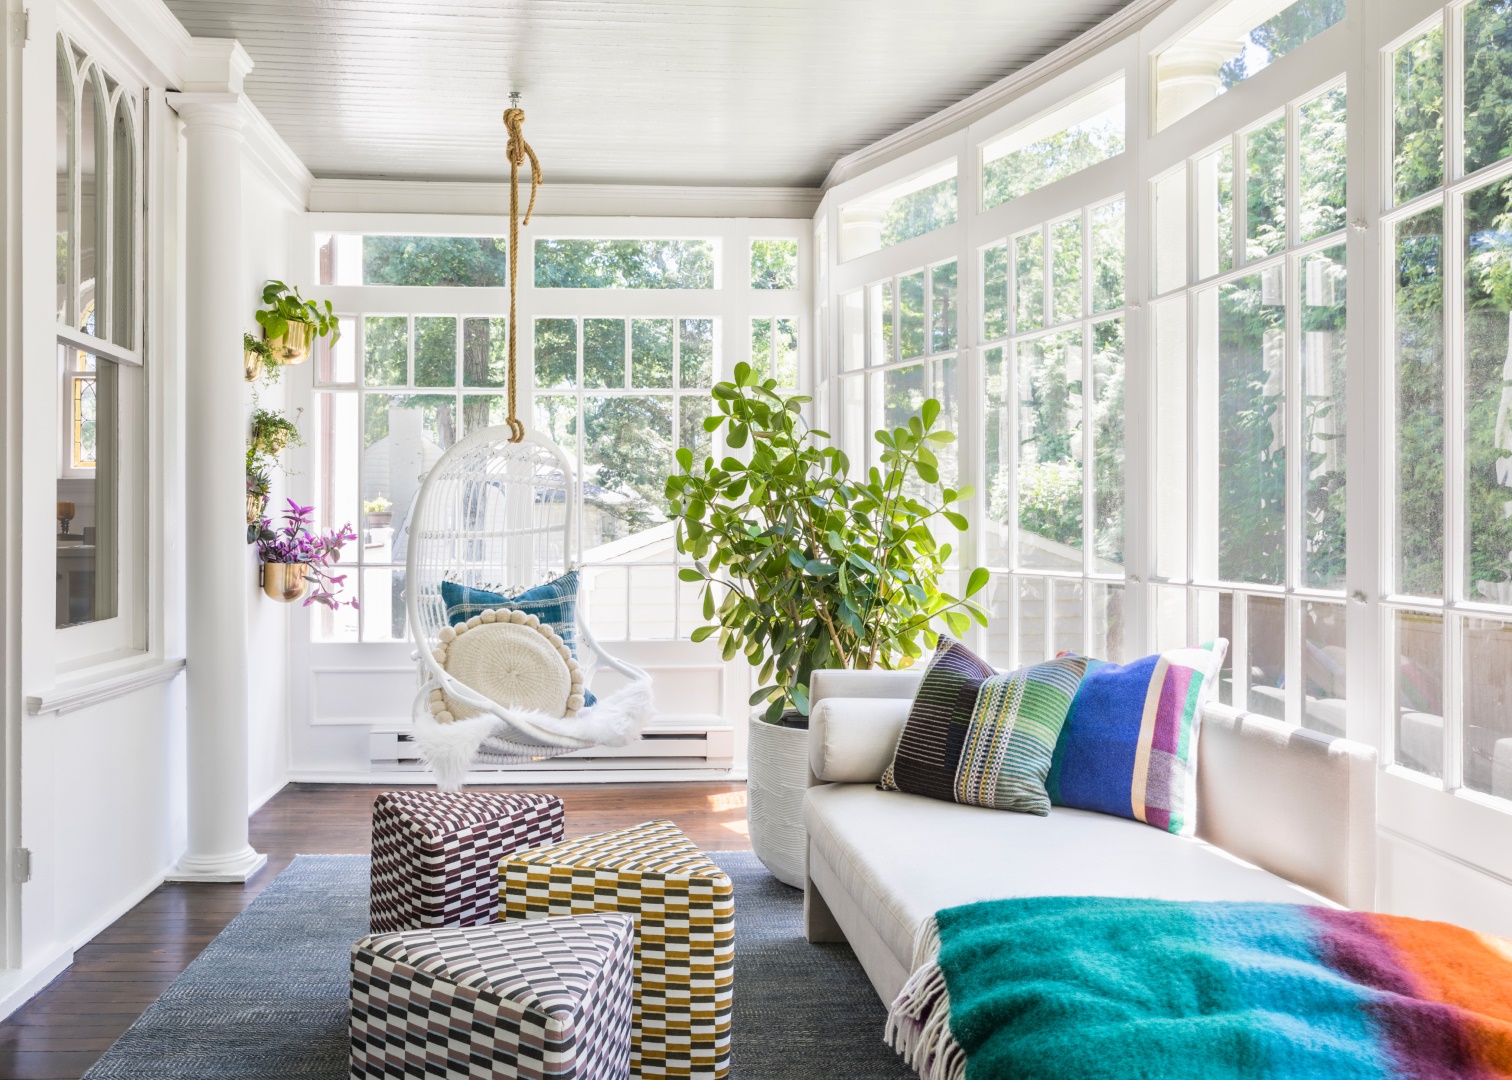 15 Stunning Transitional Sunroom Designs to Brighten Up Your Home